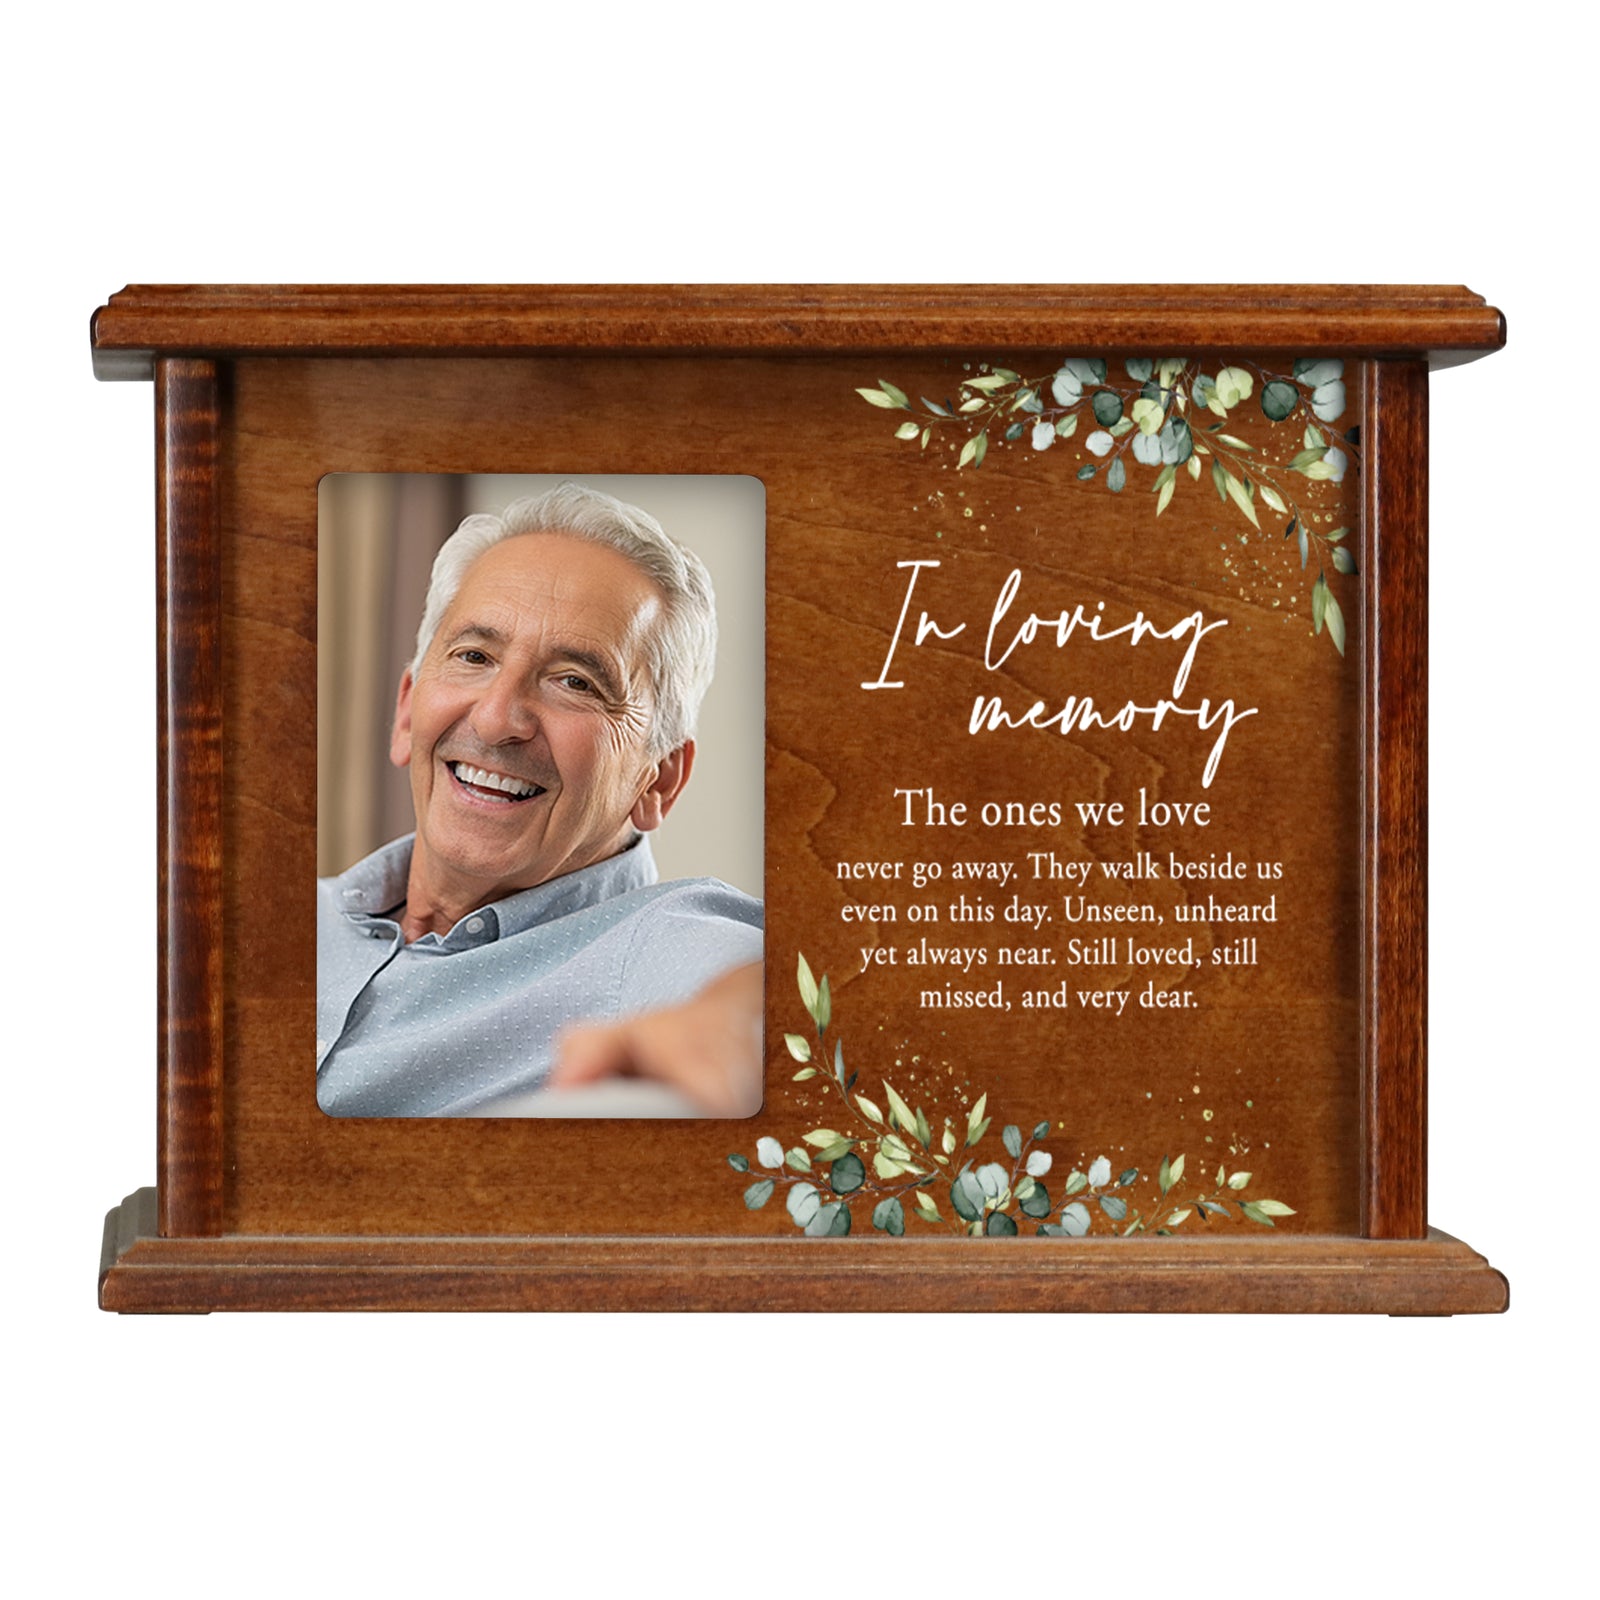 Wooden Memorial Photo Cremation Urn Box for Human Ashes